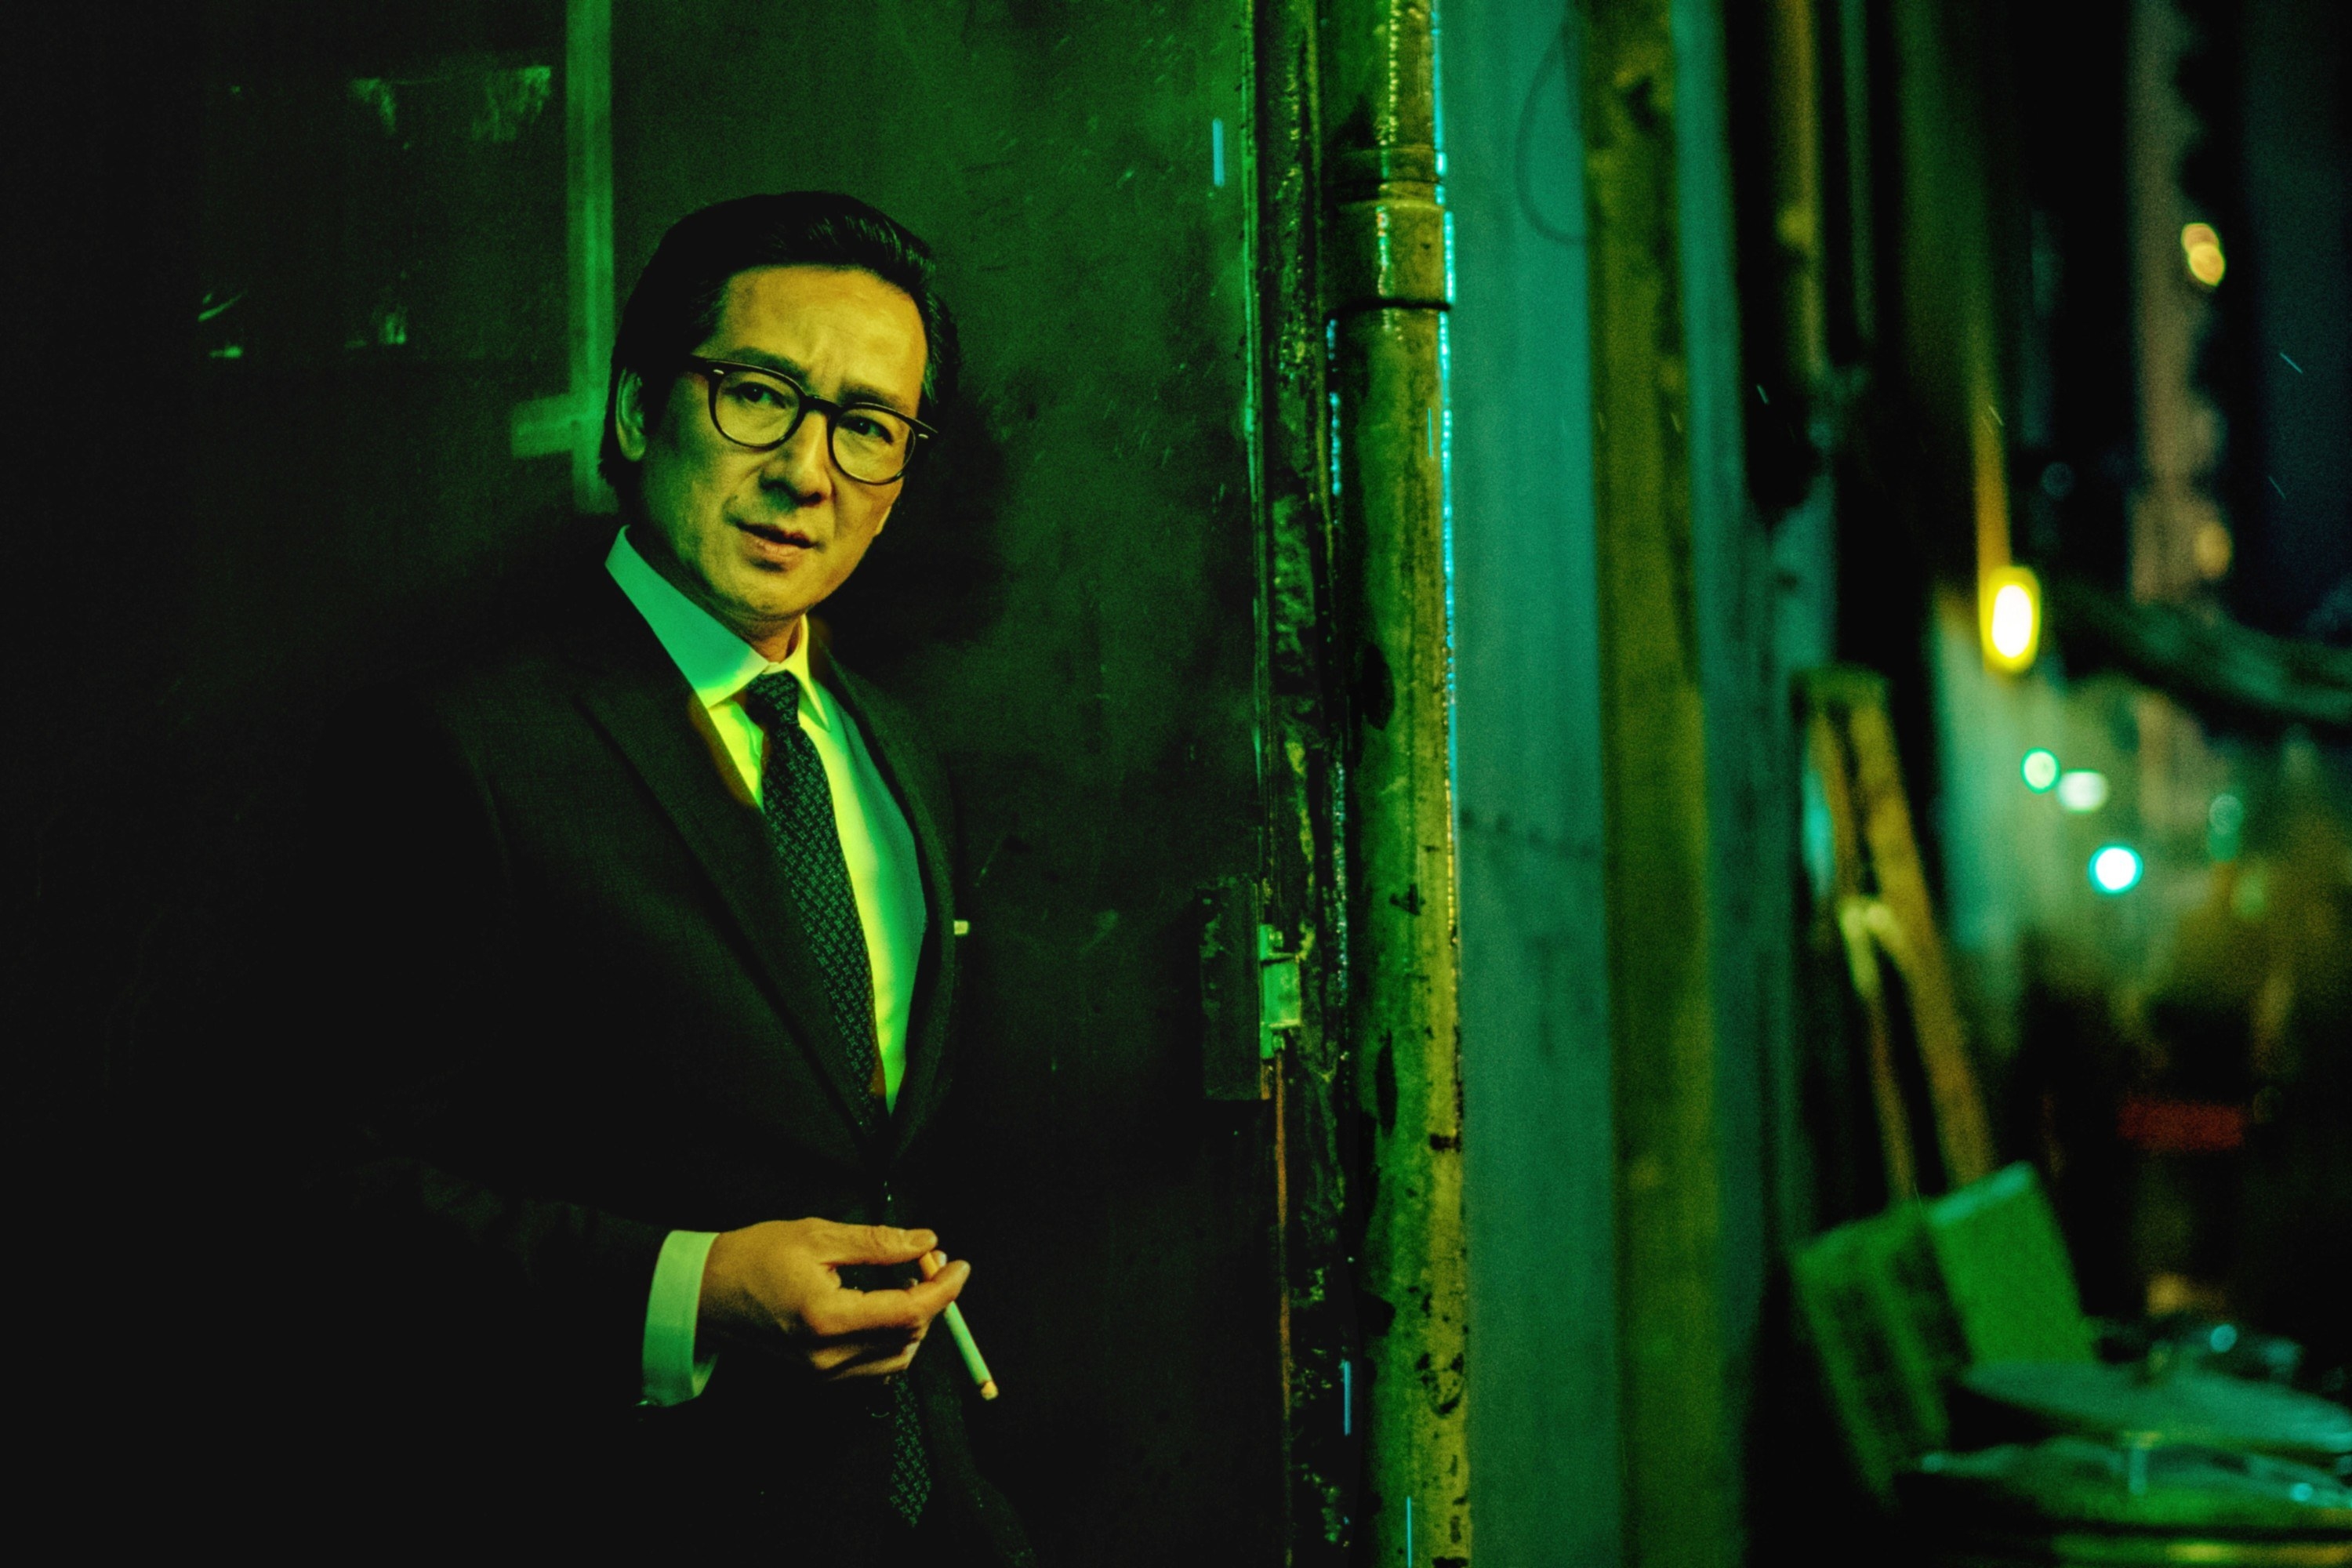 Quan wearing a suit and tie and holding a cigarette as he stands in a doorway leading outside in a scene in &quot;Everything Everywhere All at Once&quot;